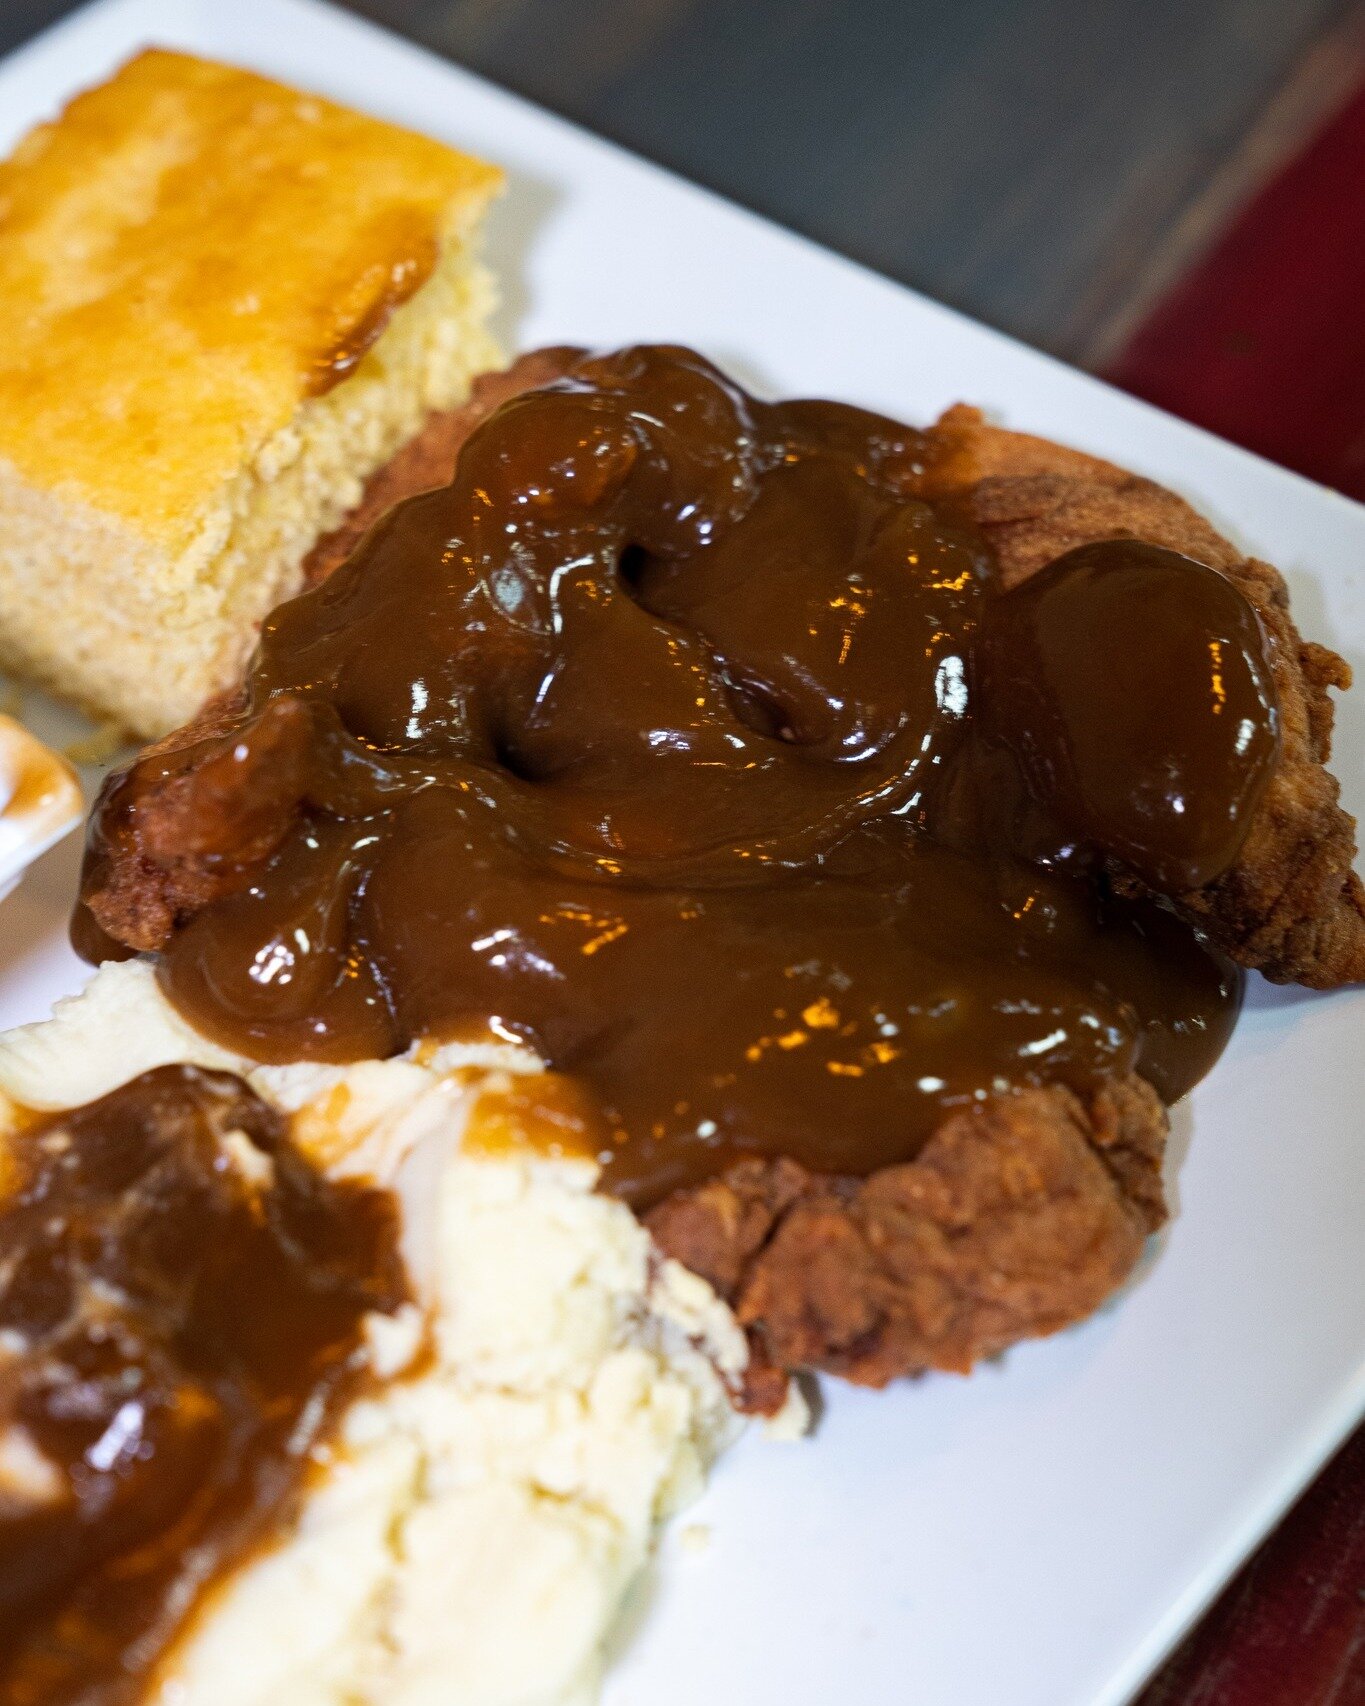 Hey North Lakeland! There&rsquo;s no better way to brighten your day than with a trip to Britt&rsquo;s Cafe! 

Come on in on Tuesdays and try our hand-breaded tenders smothered in Britt&rsquo;s brown gravy served with green beans and mashed potatoes.